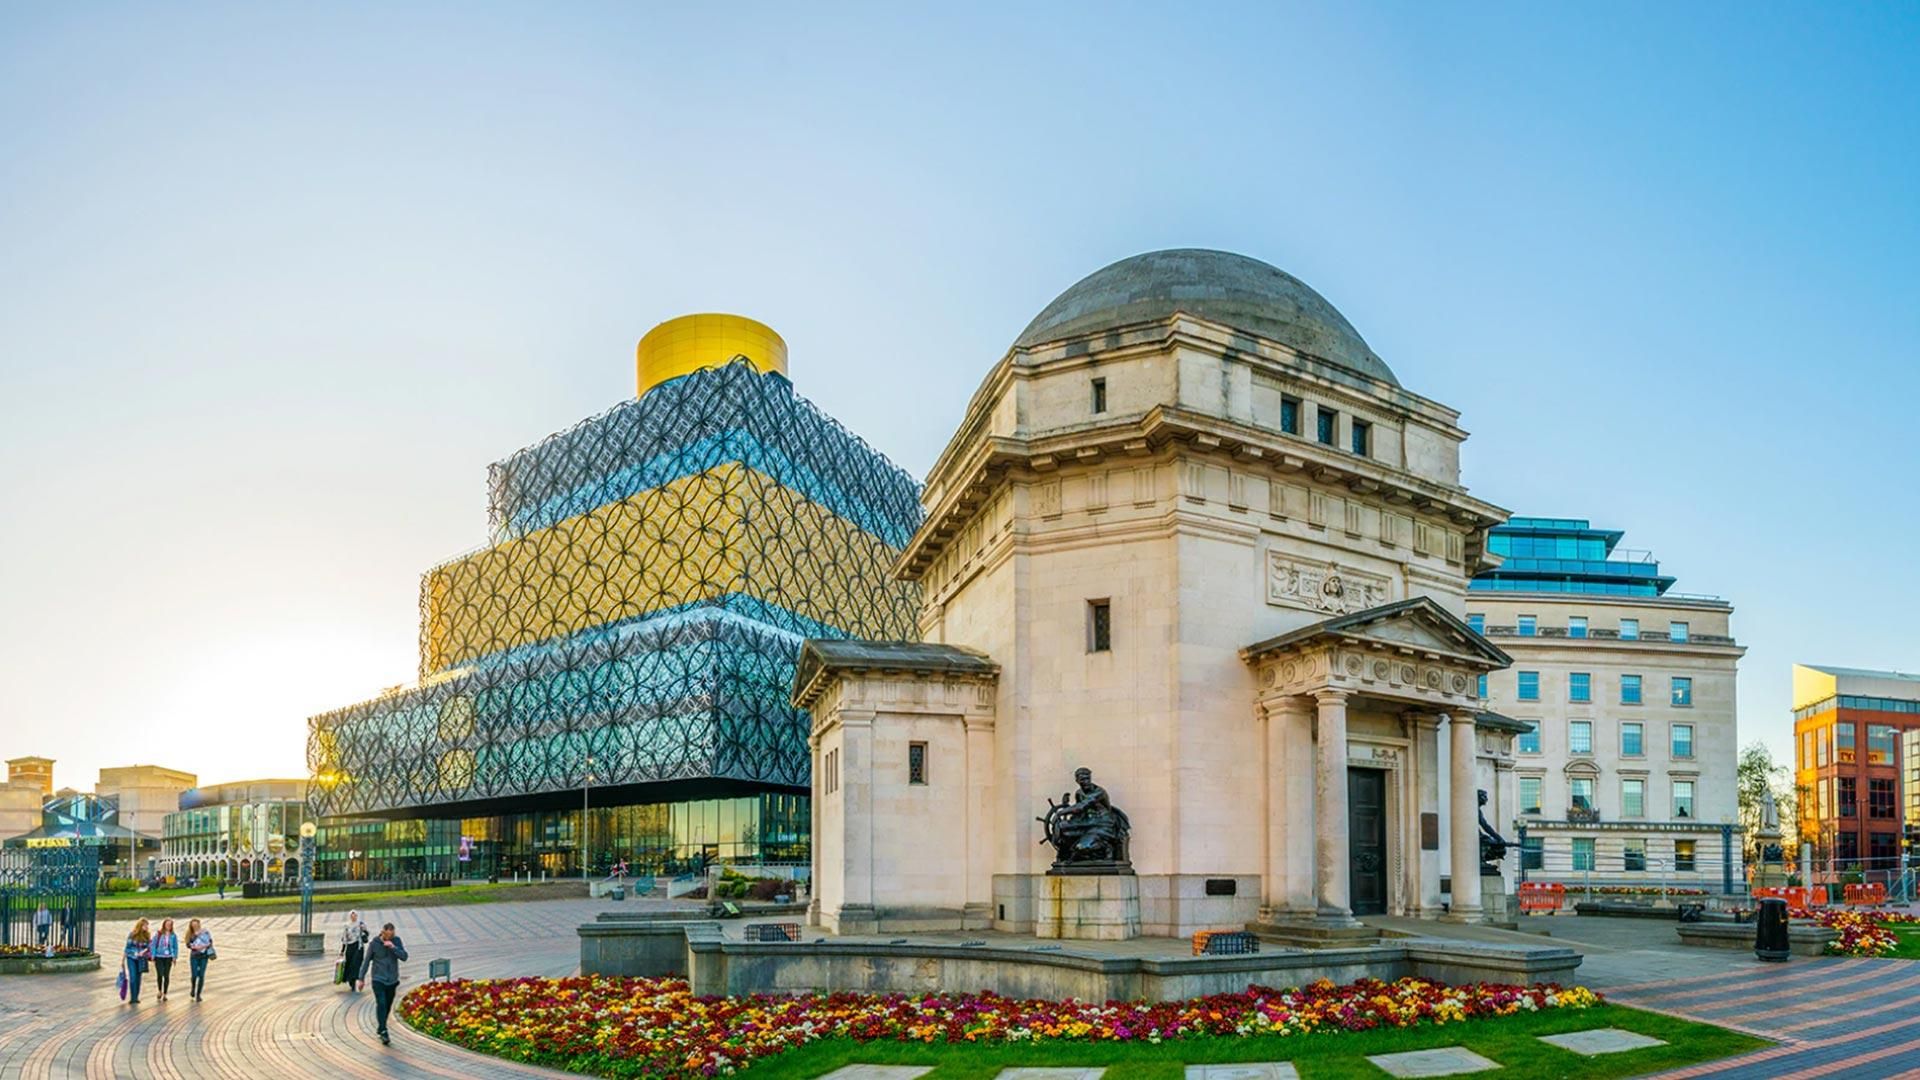 All the places and things to see in Birmingham